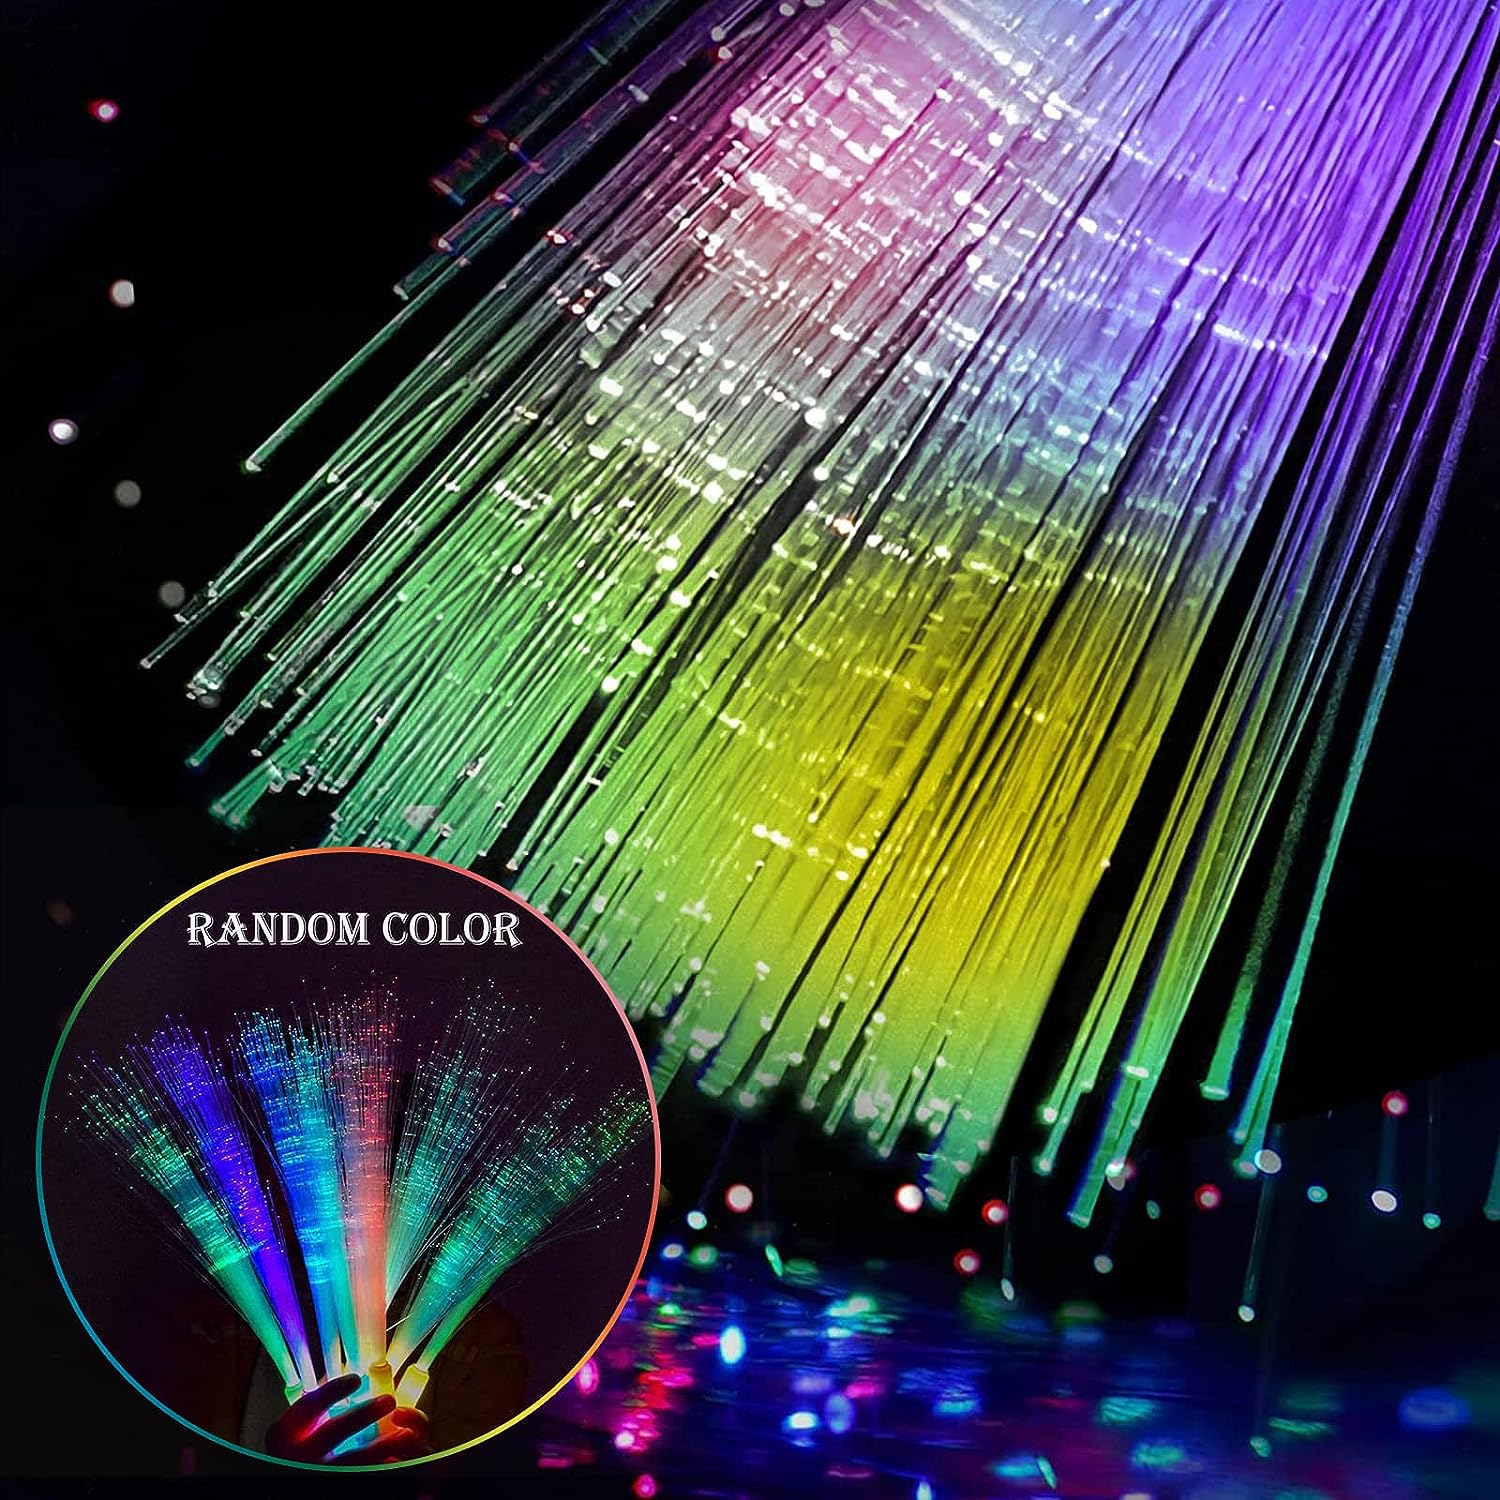 Fiber Optic Light Sticks, Colorful Flashing Led Light Sticks, Glow Sticks  Party Supplies With Multicolor Light, 3 Flashing Modes, For Parties,  Concerts And Weddings, Party Decor Supplies, Cute Aesthetic Stuff, Cool  Gadgets